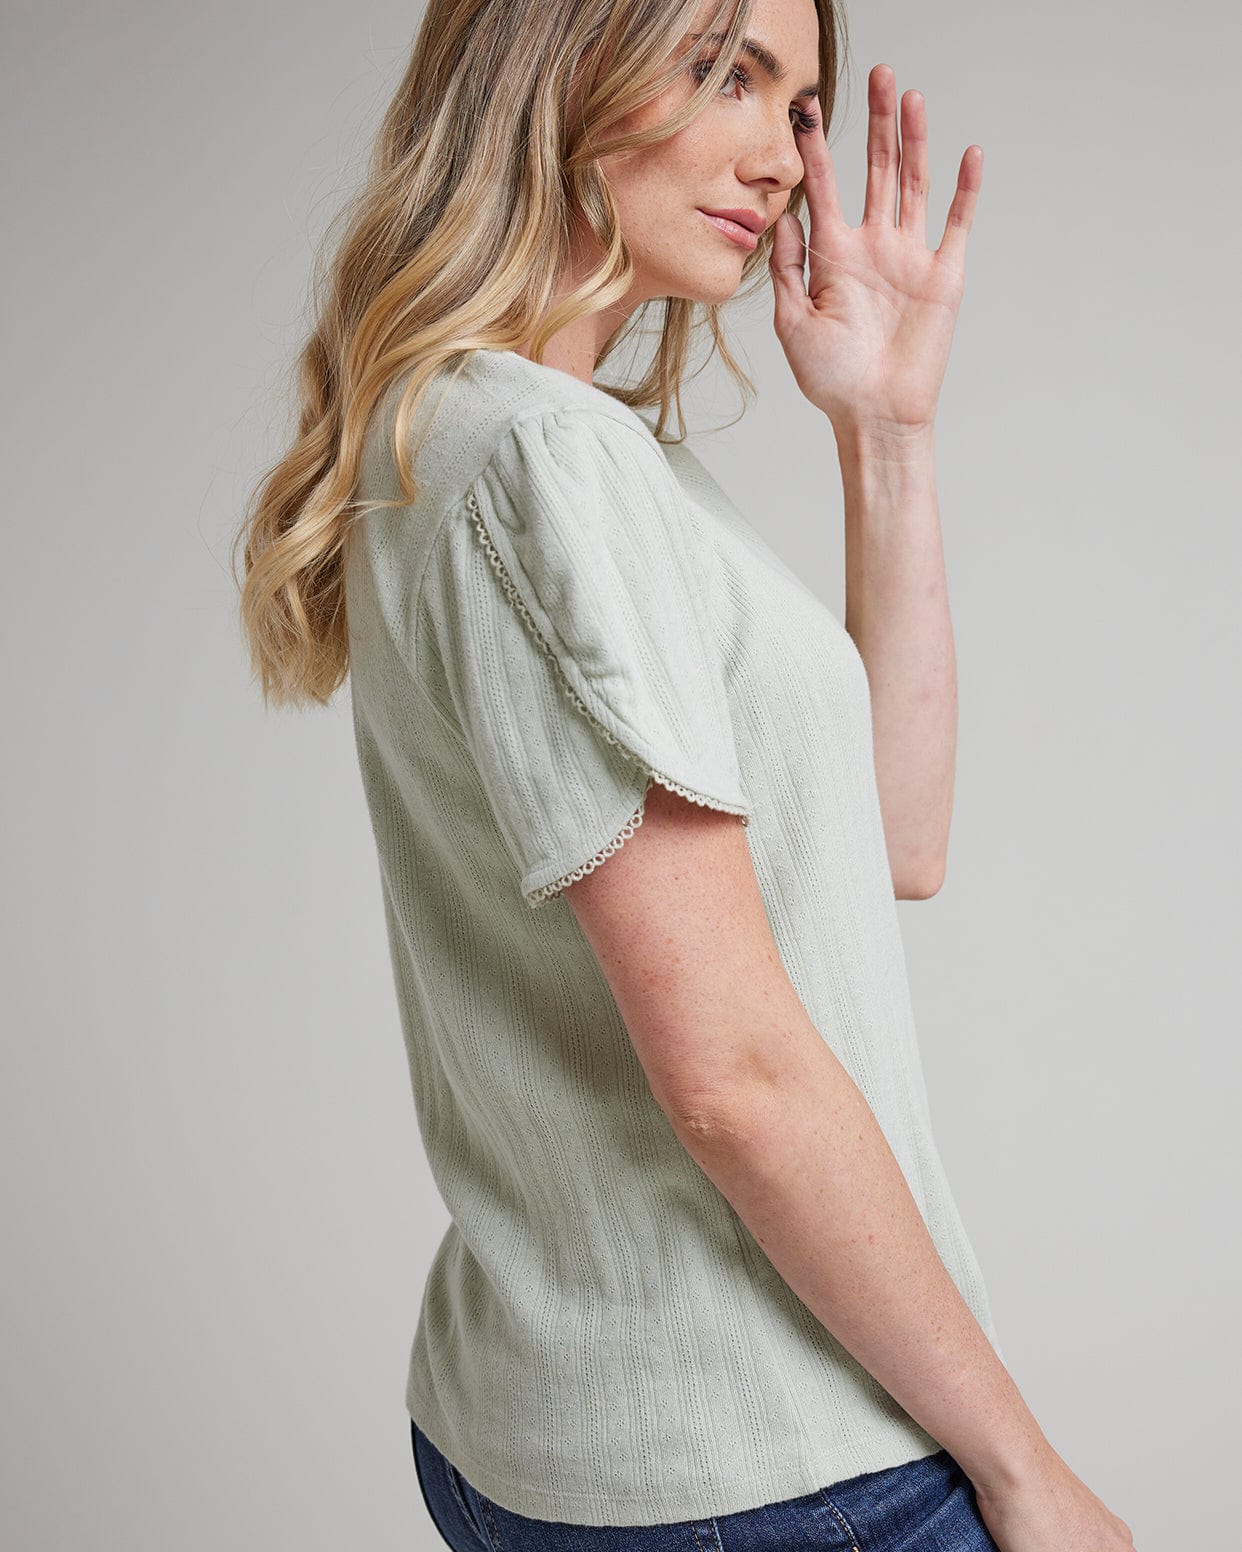 Woman in a short tulip sleeve top